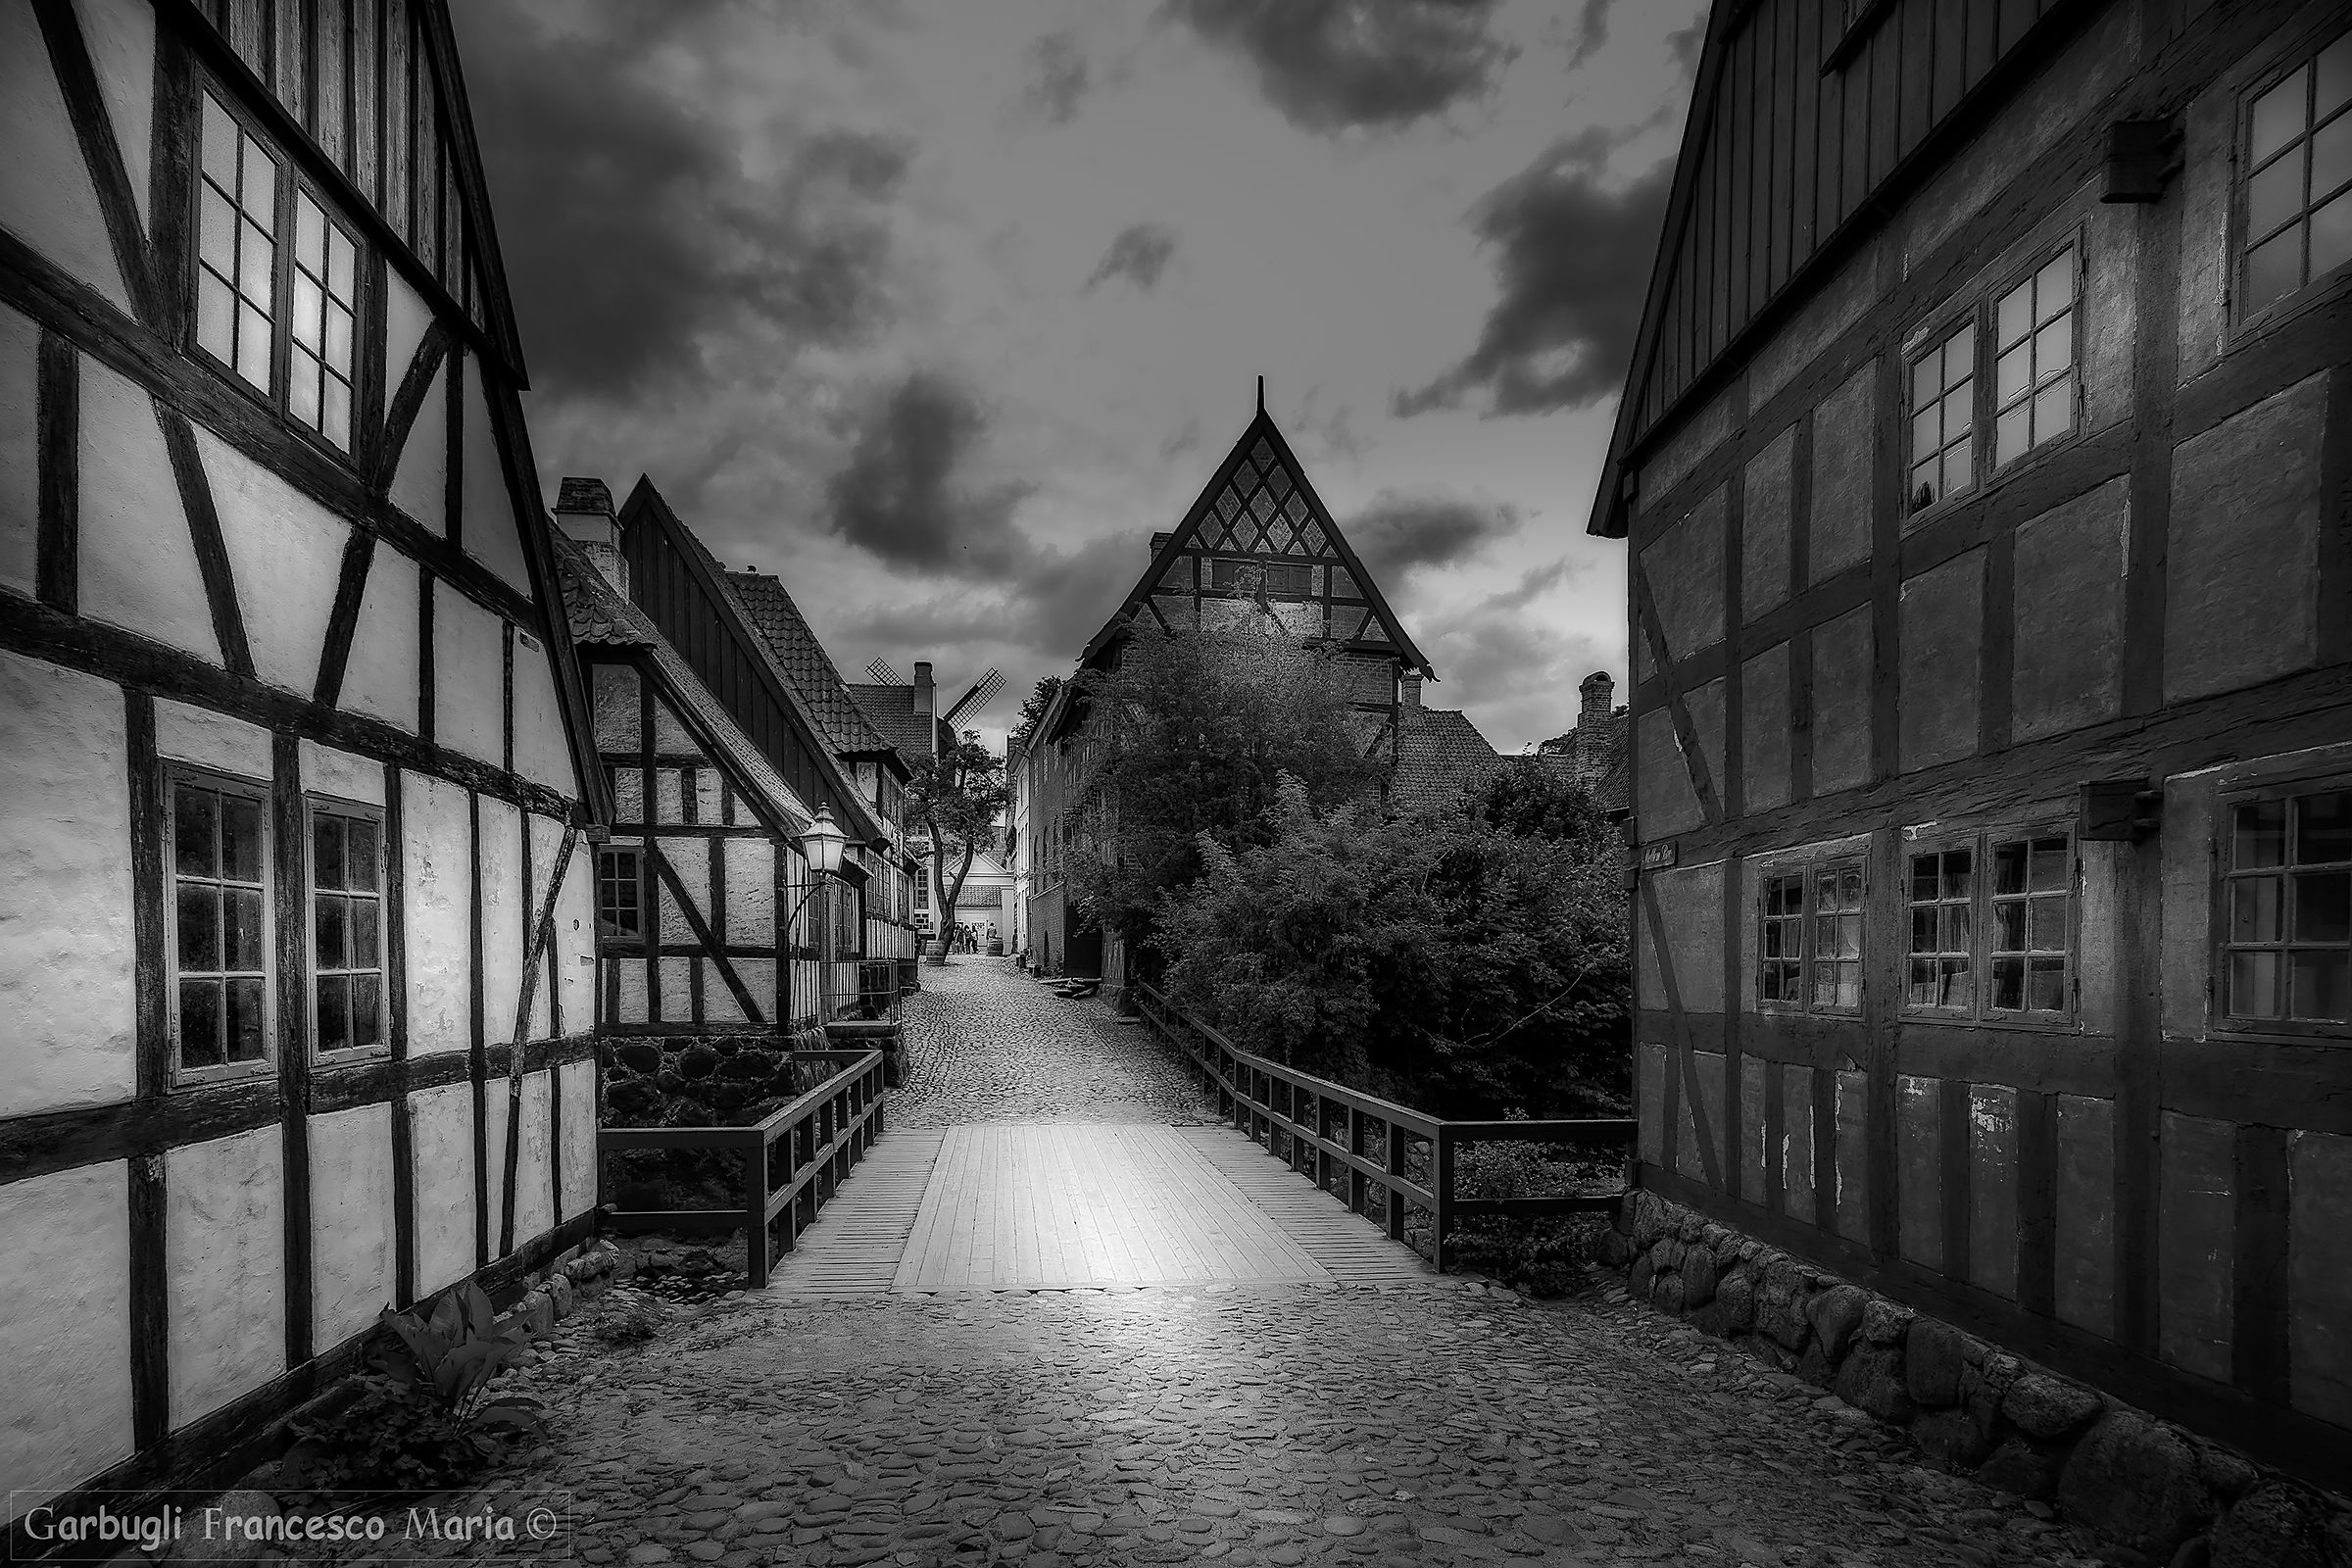 "Den Gamle By" in White and Black at Aarhus...